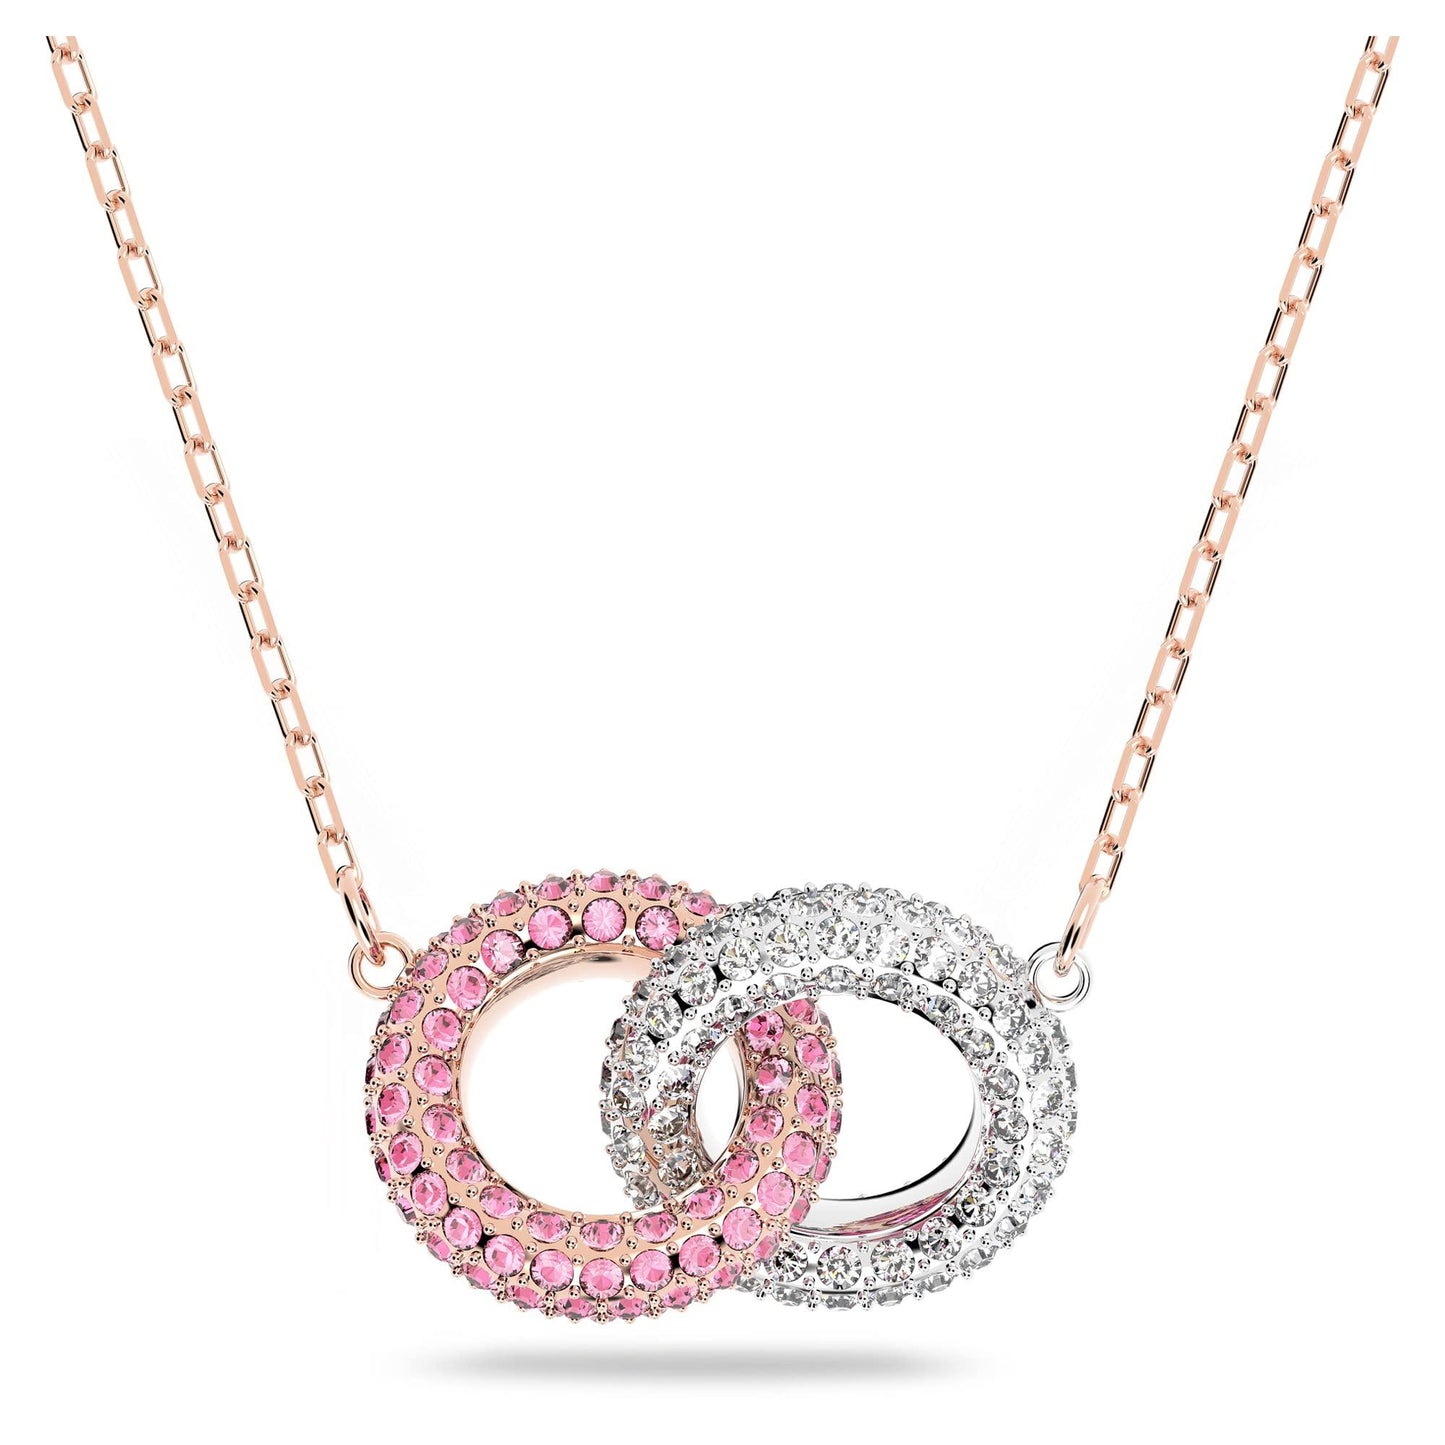 Swarovski Stone Pendant Necklace with Interlocking Circle Design, Pink and White Crystals on Rose Gold-Tone Finish Chain, Part of the Swarovski Stone Collection